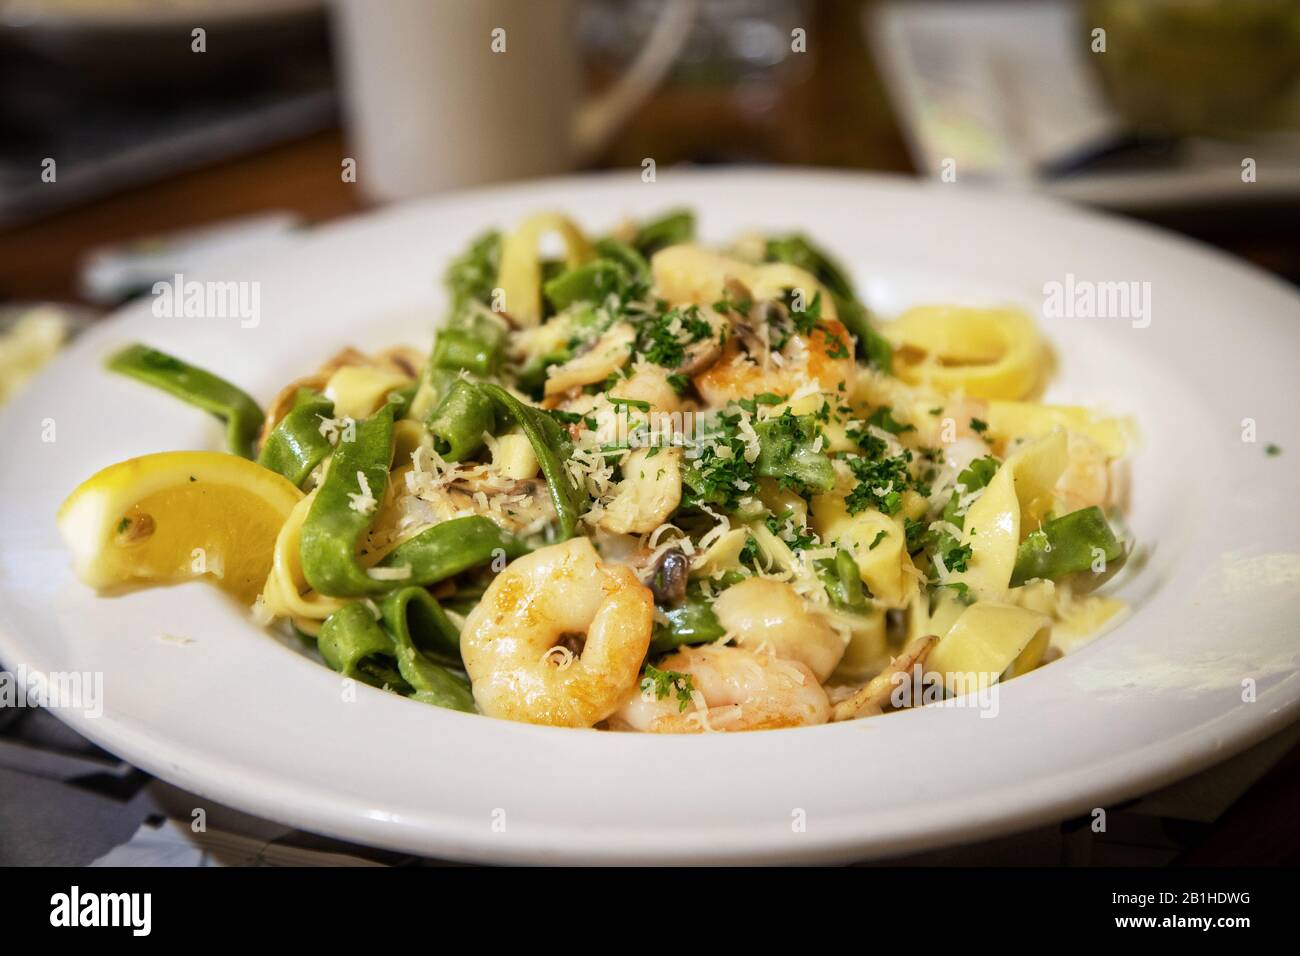 Seafood alfredo in creamy sauce with prawns, scallops and mushrooms sauteed with spinach and egg fettuccine noodles. Stock Photo